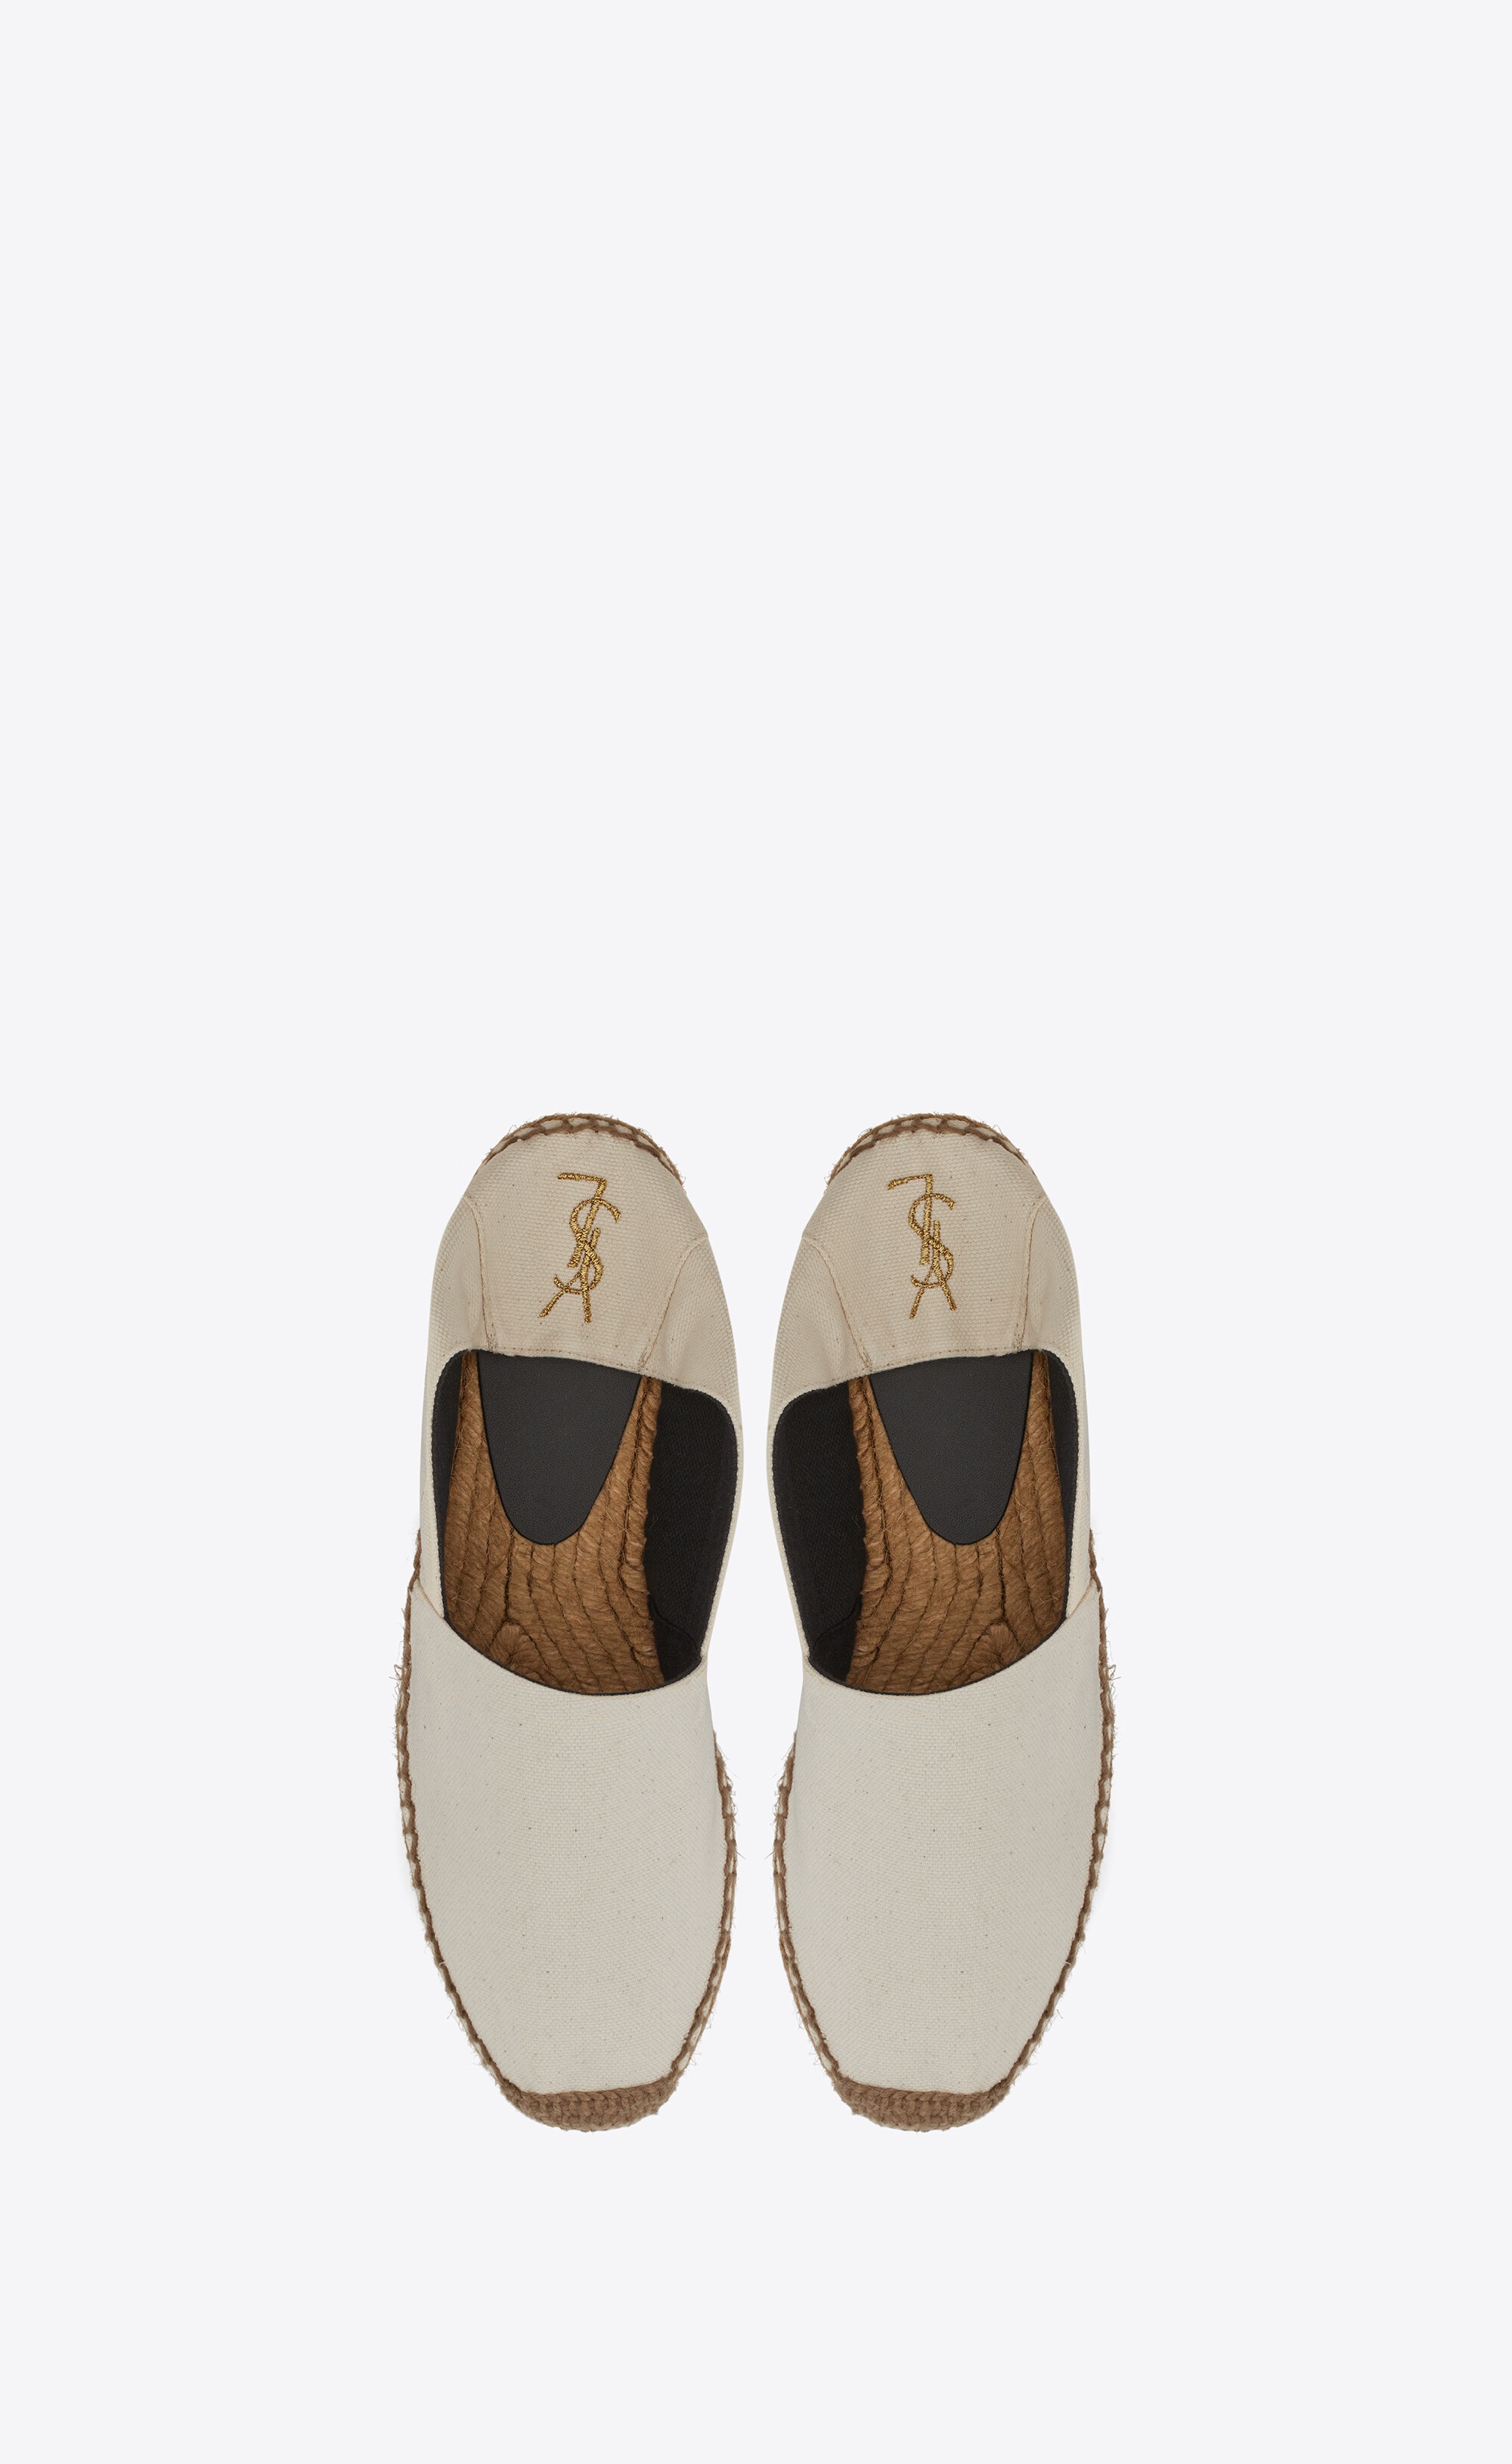 ysl embroidered espadrilles in canvas - 2